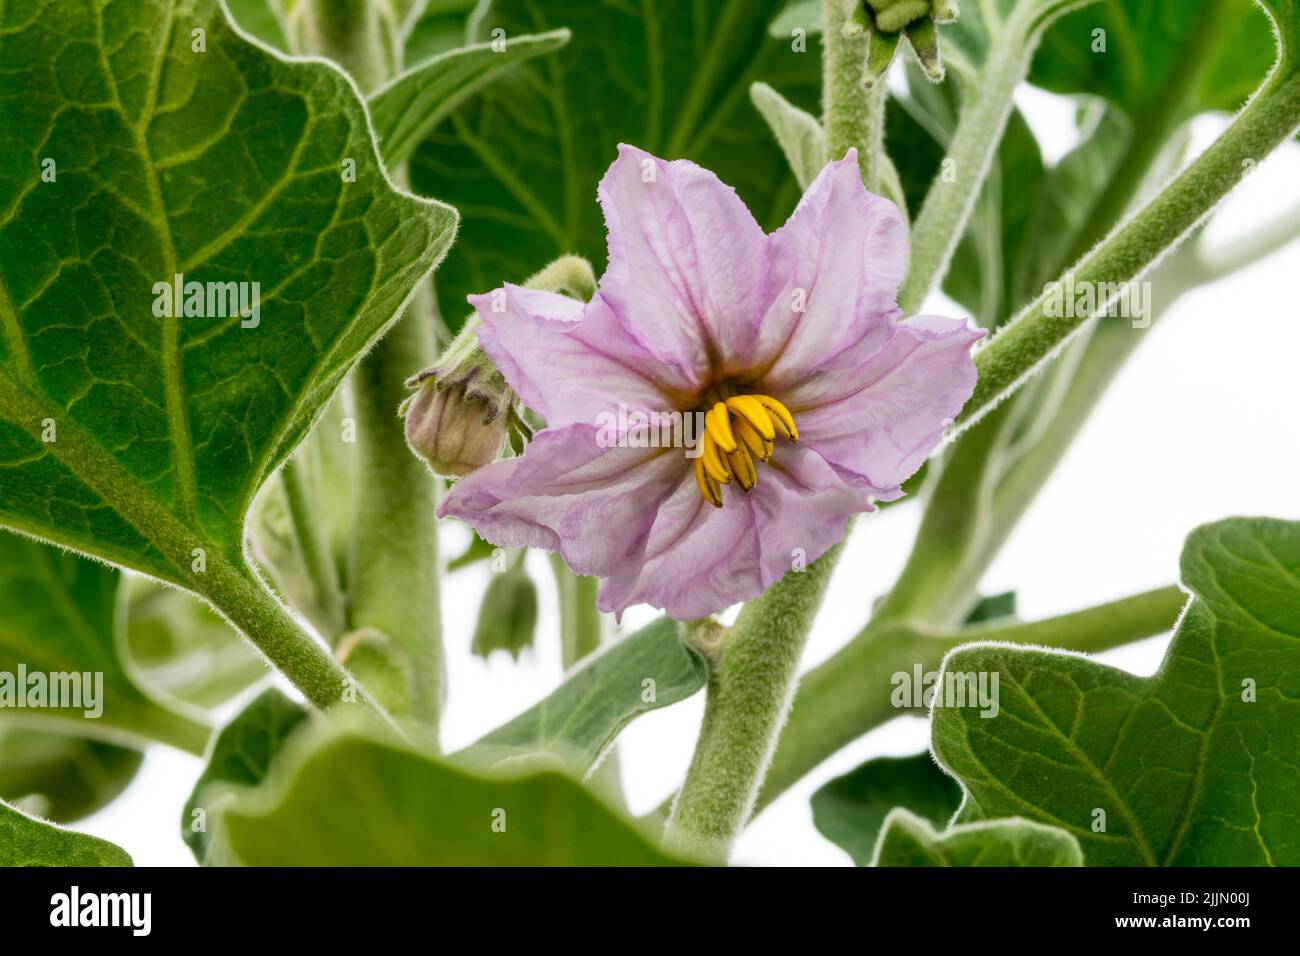 Flower on a 'Black Beauty' organic aubergine plant growing in greenhouse. Stock Photo